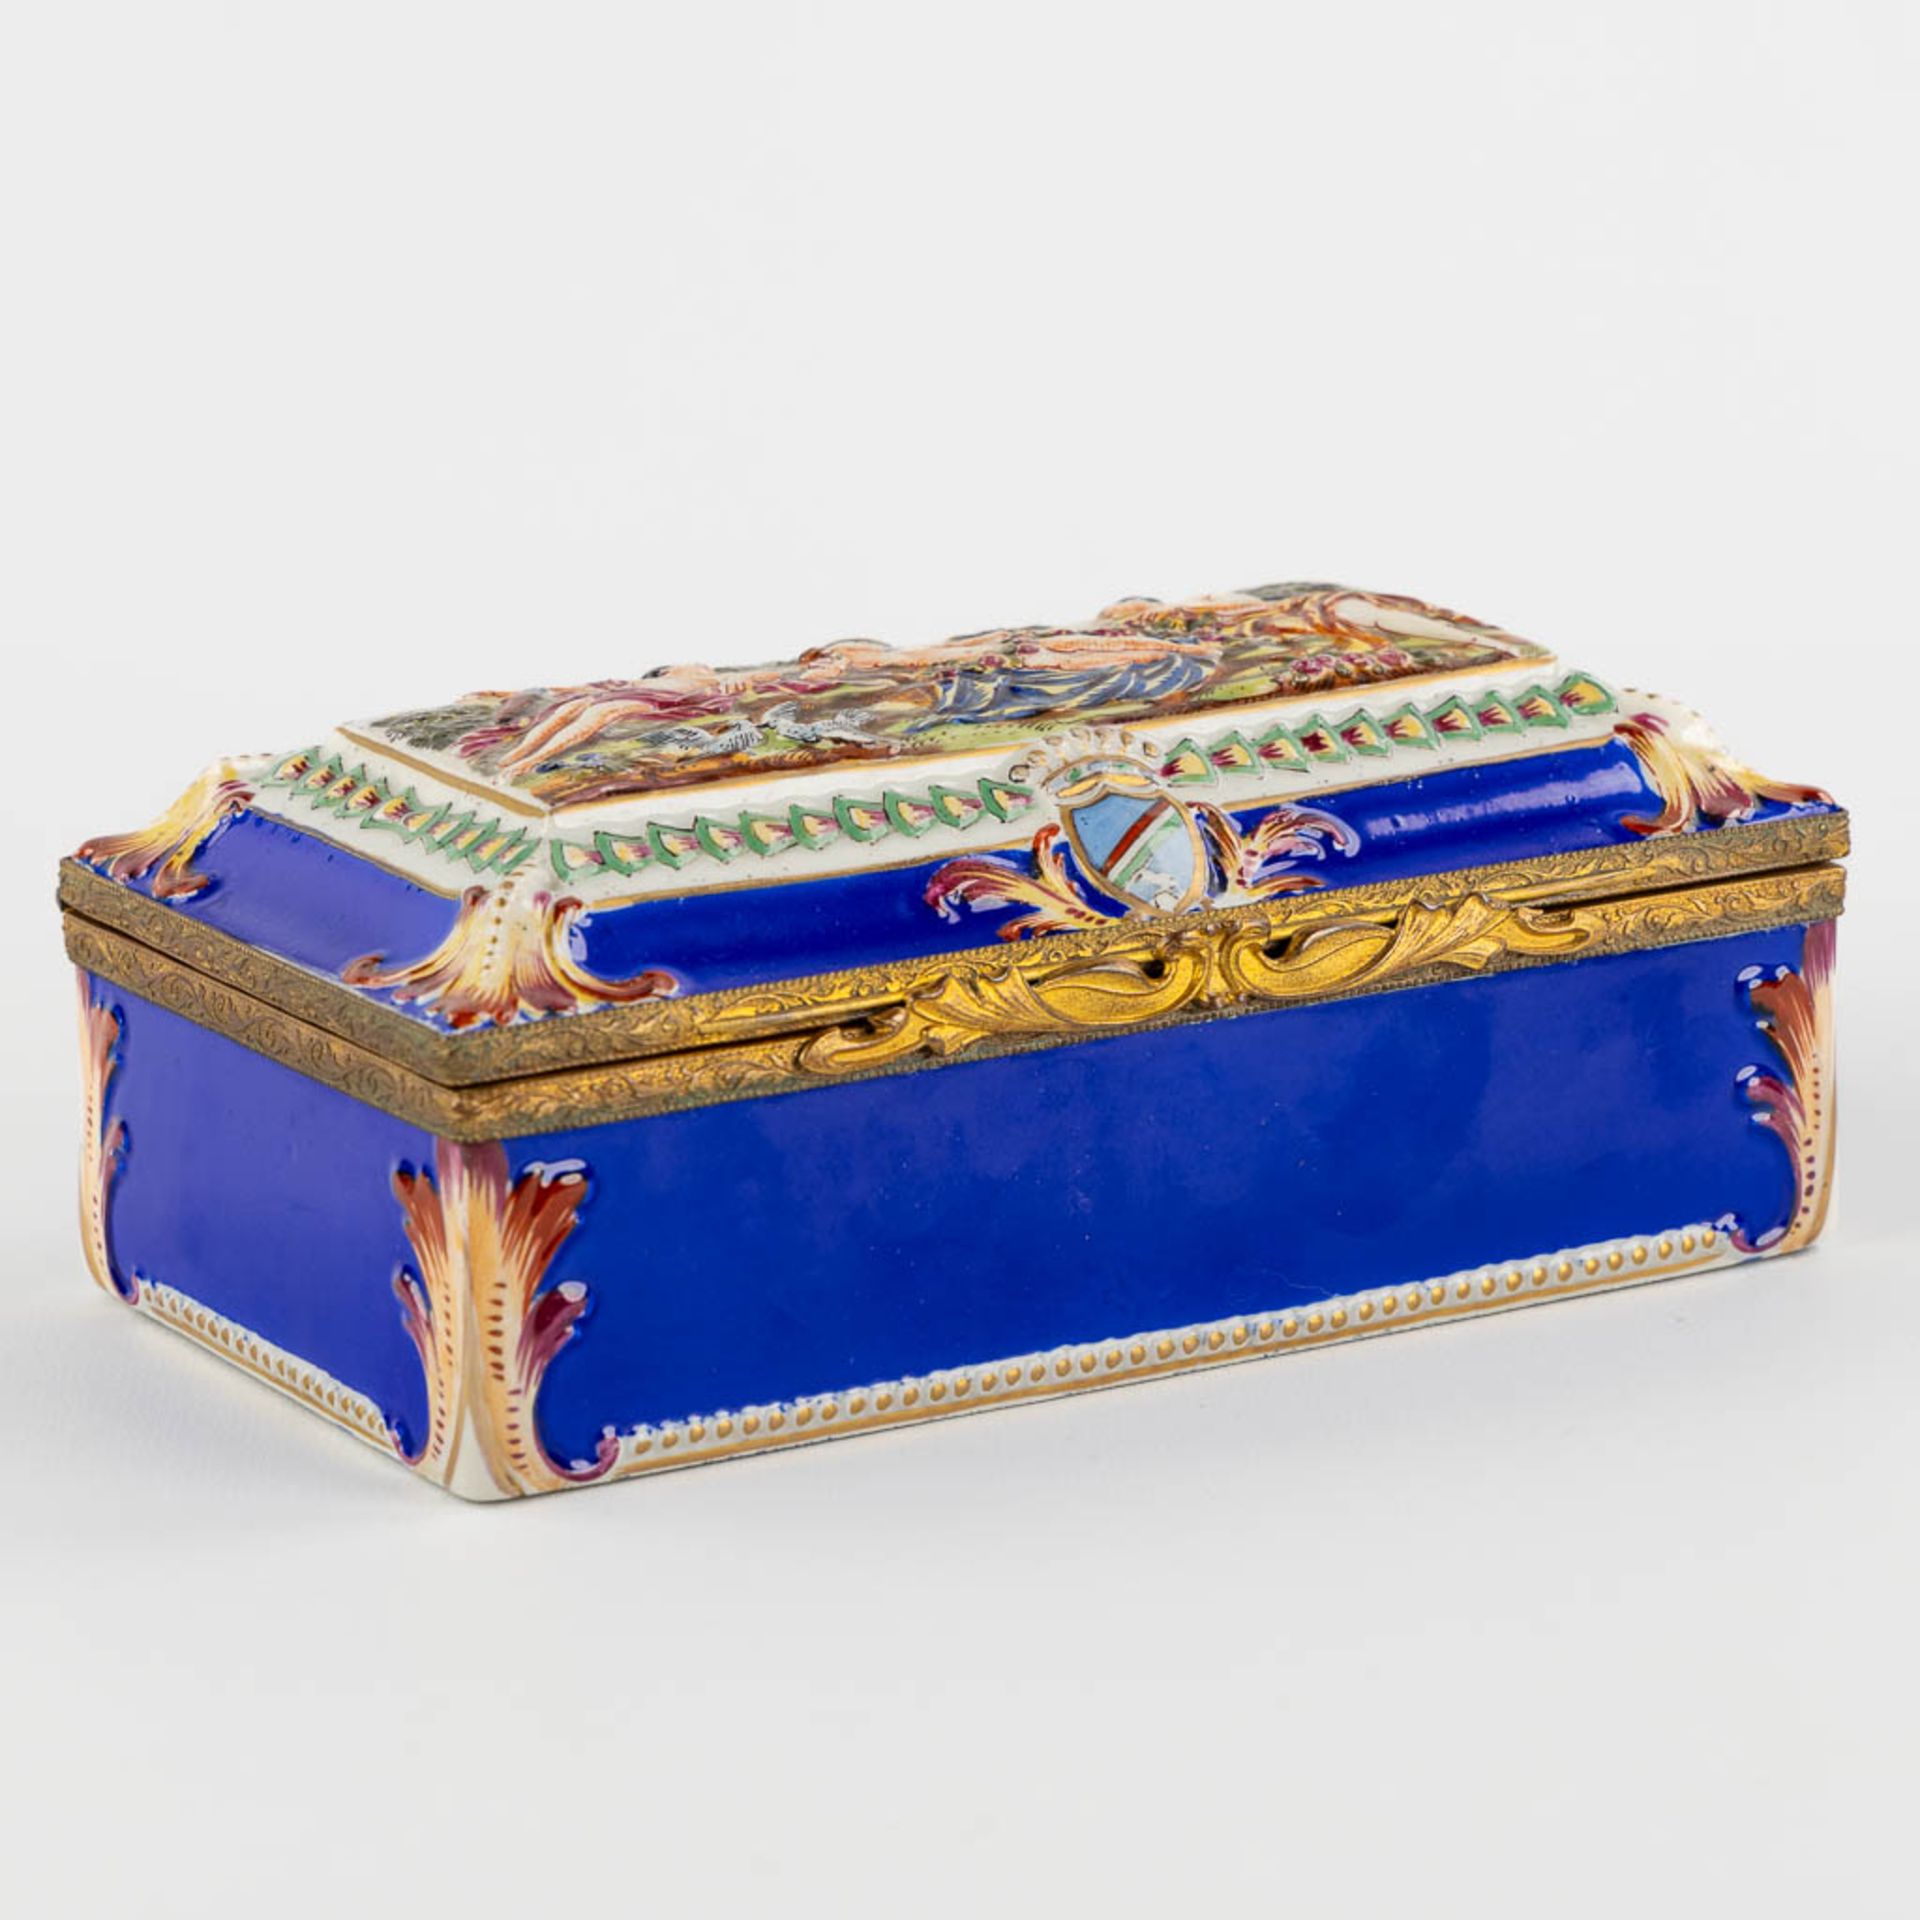 Capodimonte, a finely made porcelain jewellery box. 19th C. (L:10 x W:19 x H:7 cm) - Image 3 of 12